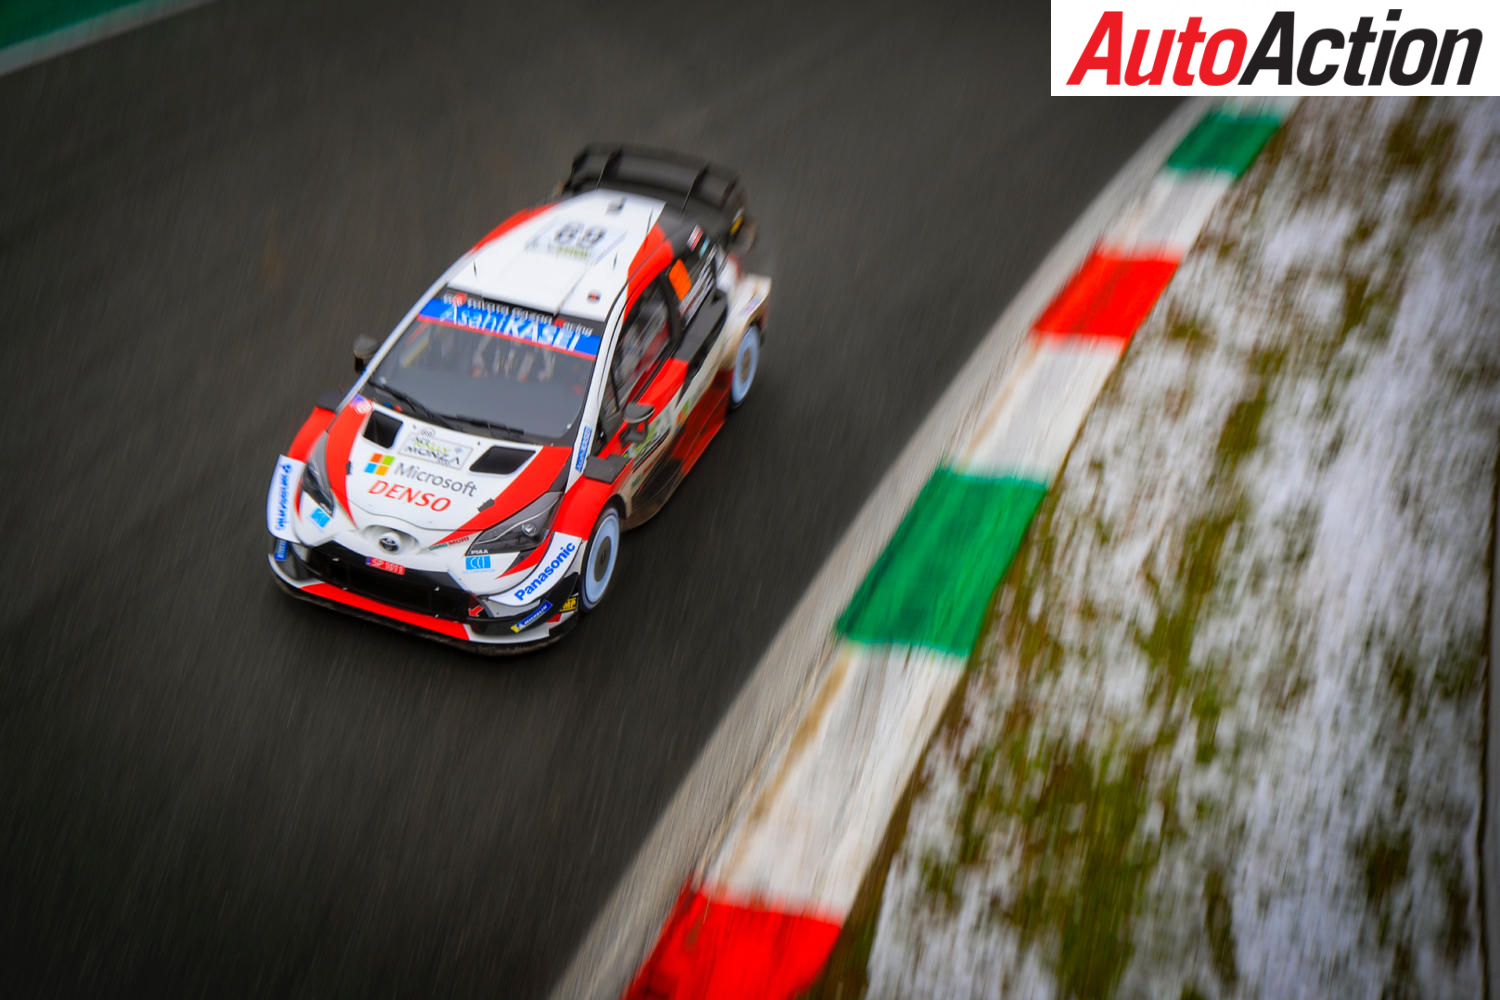 Monza to host World Rally Championship finale - Image: Motorsport Images